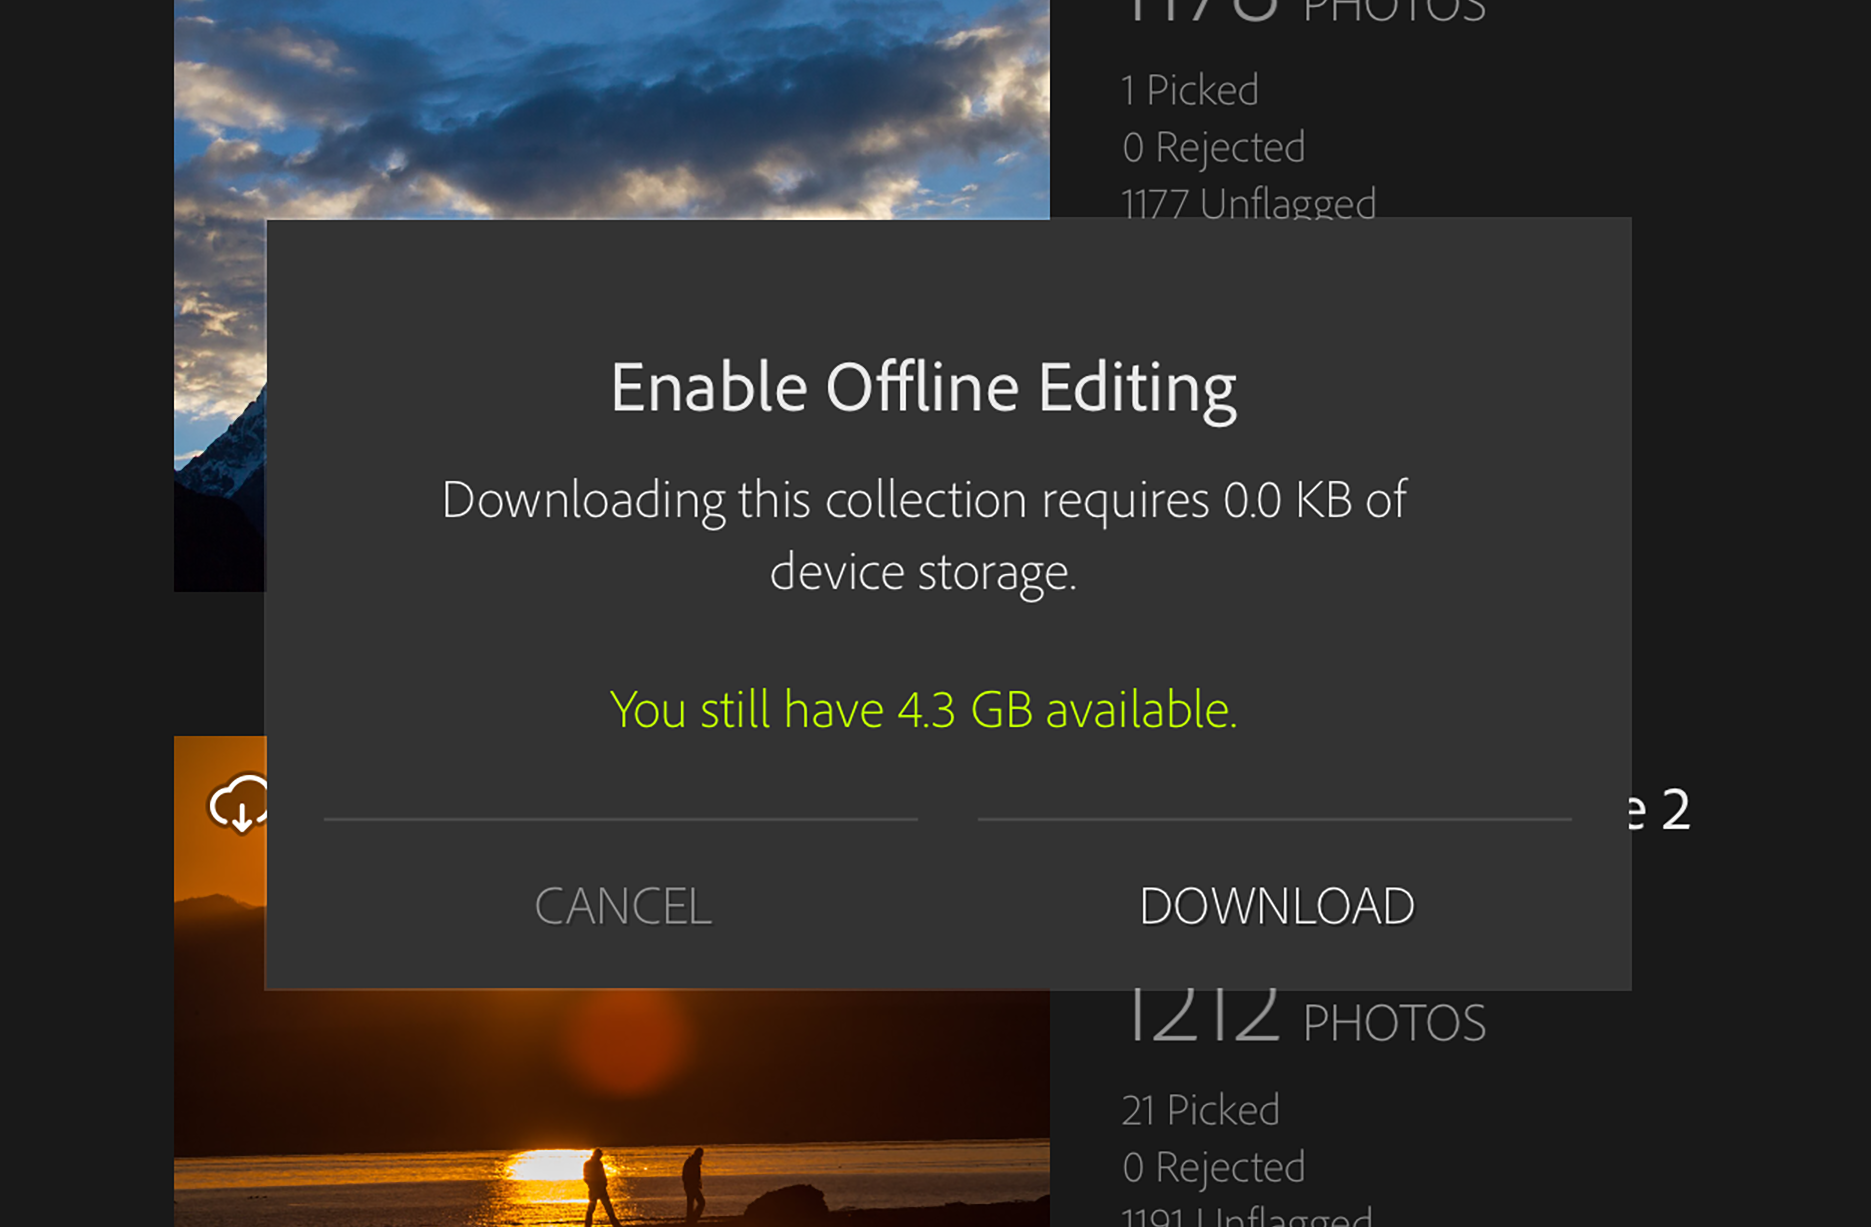 screen grab from mobile informing how much storage is available